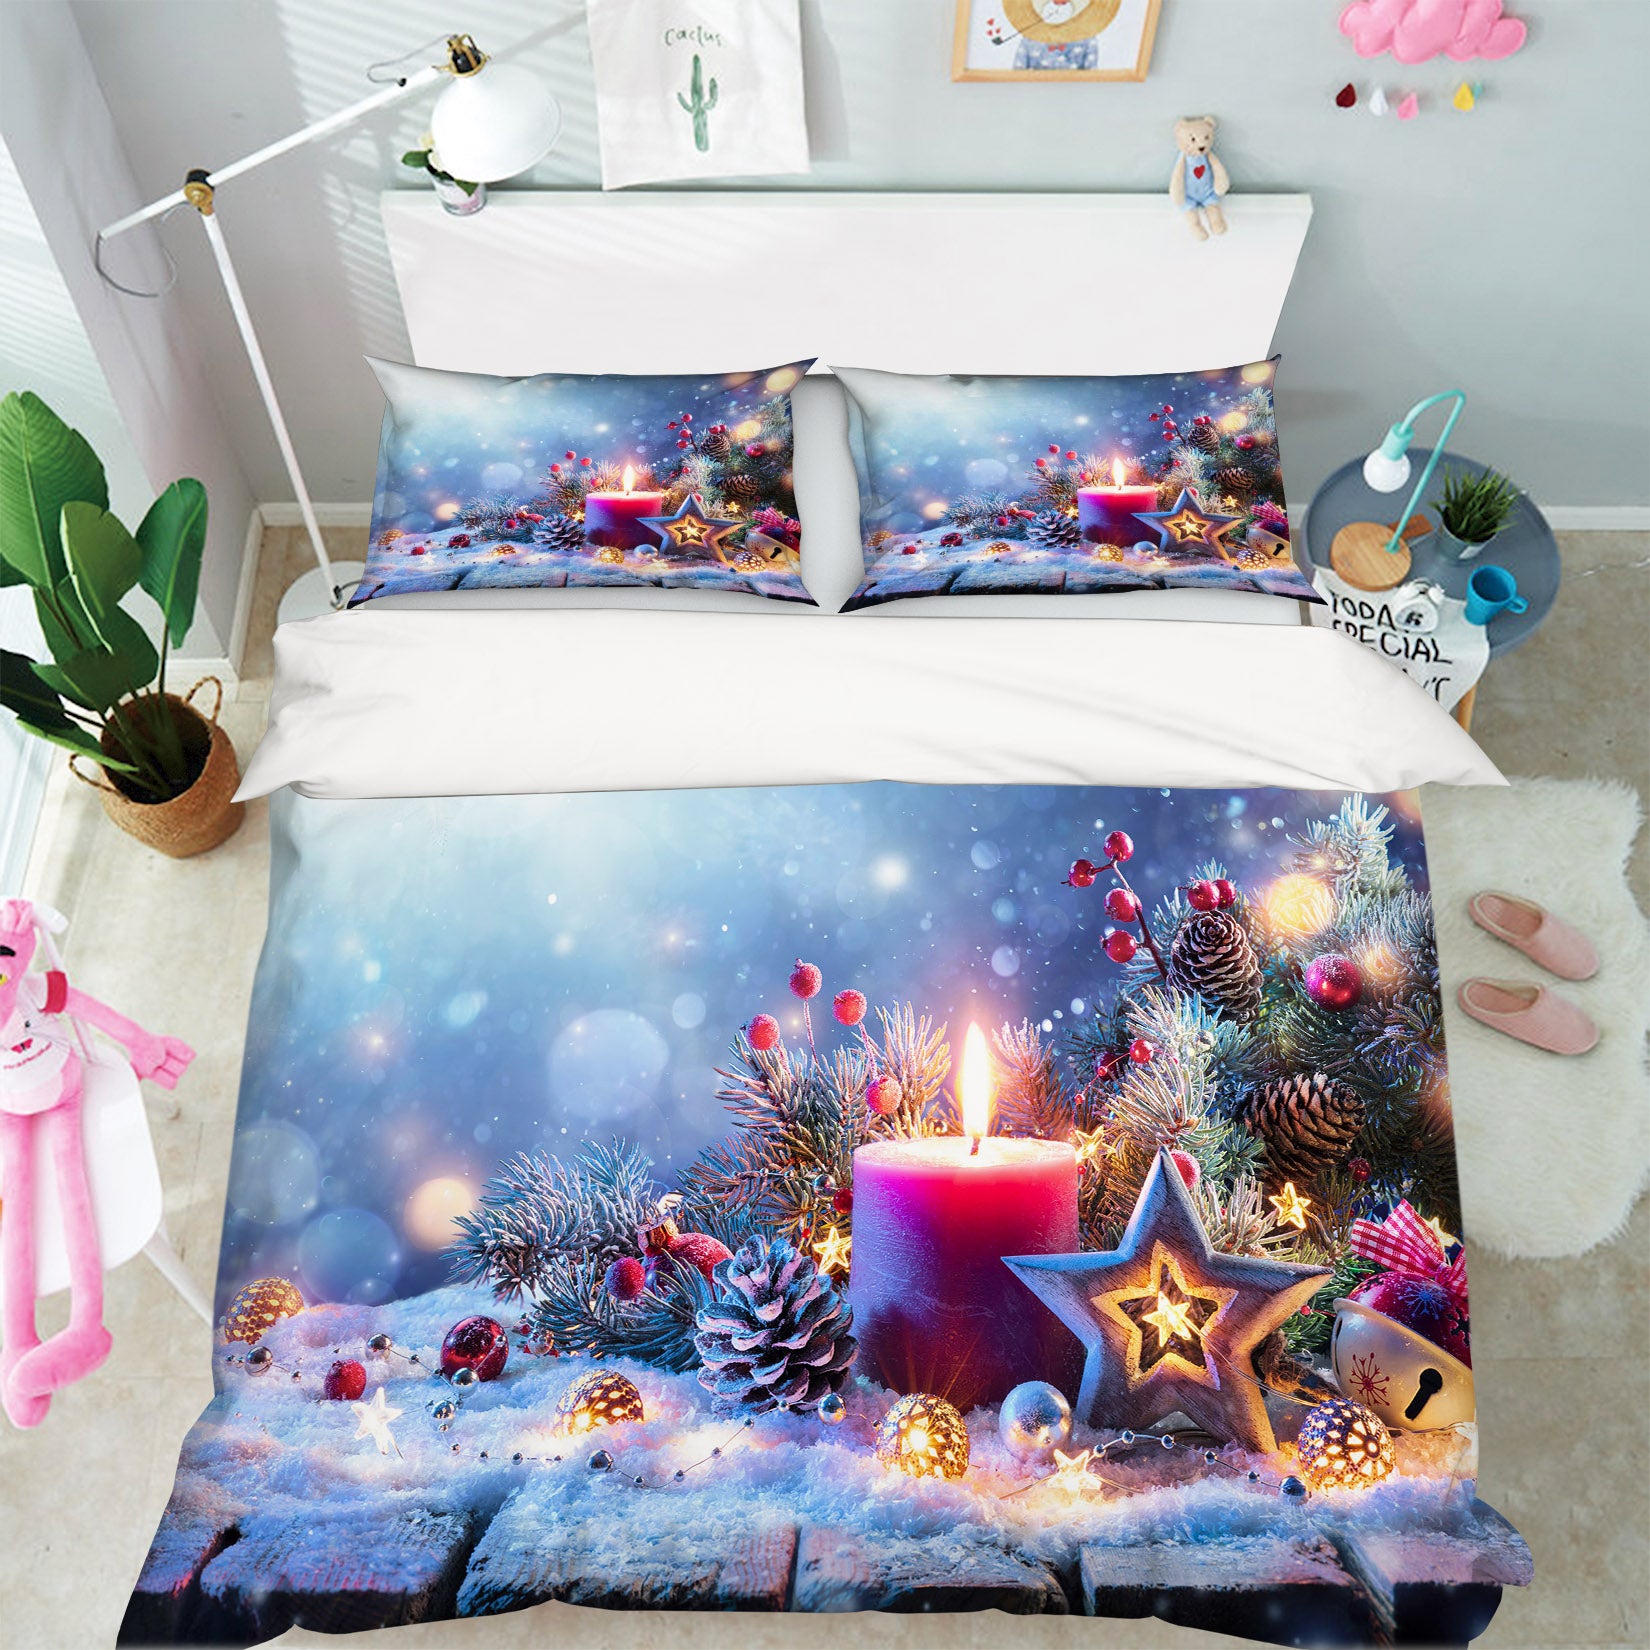 3D Candle Snow 53049 Christmas Quilt Duvet Cover Xmas Bed Pillowcases